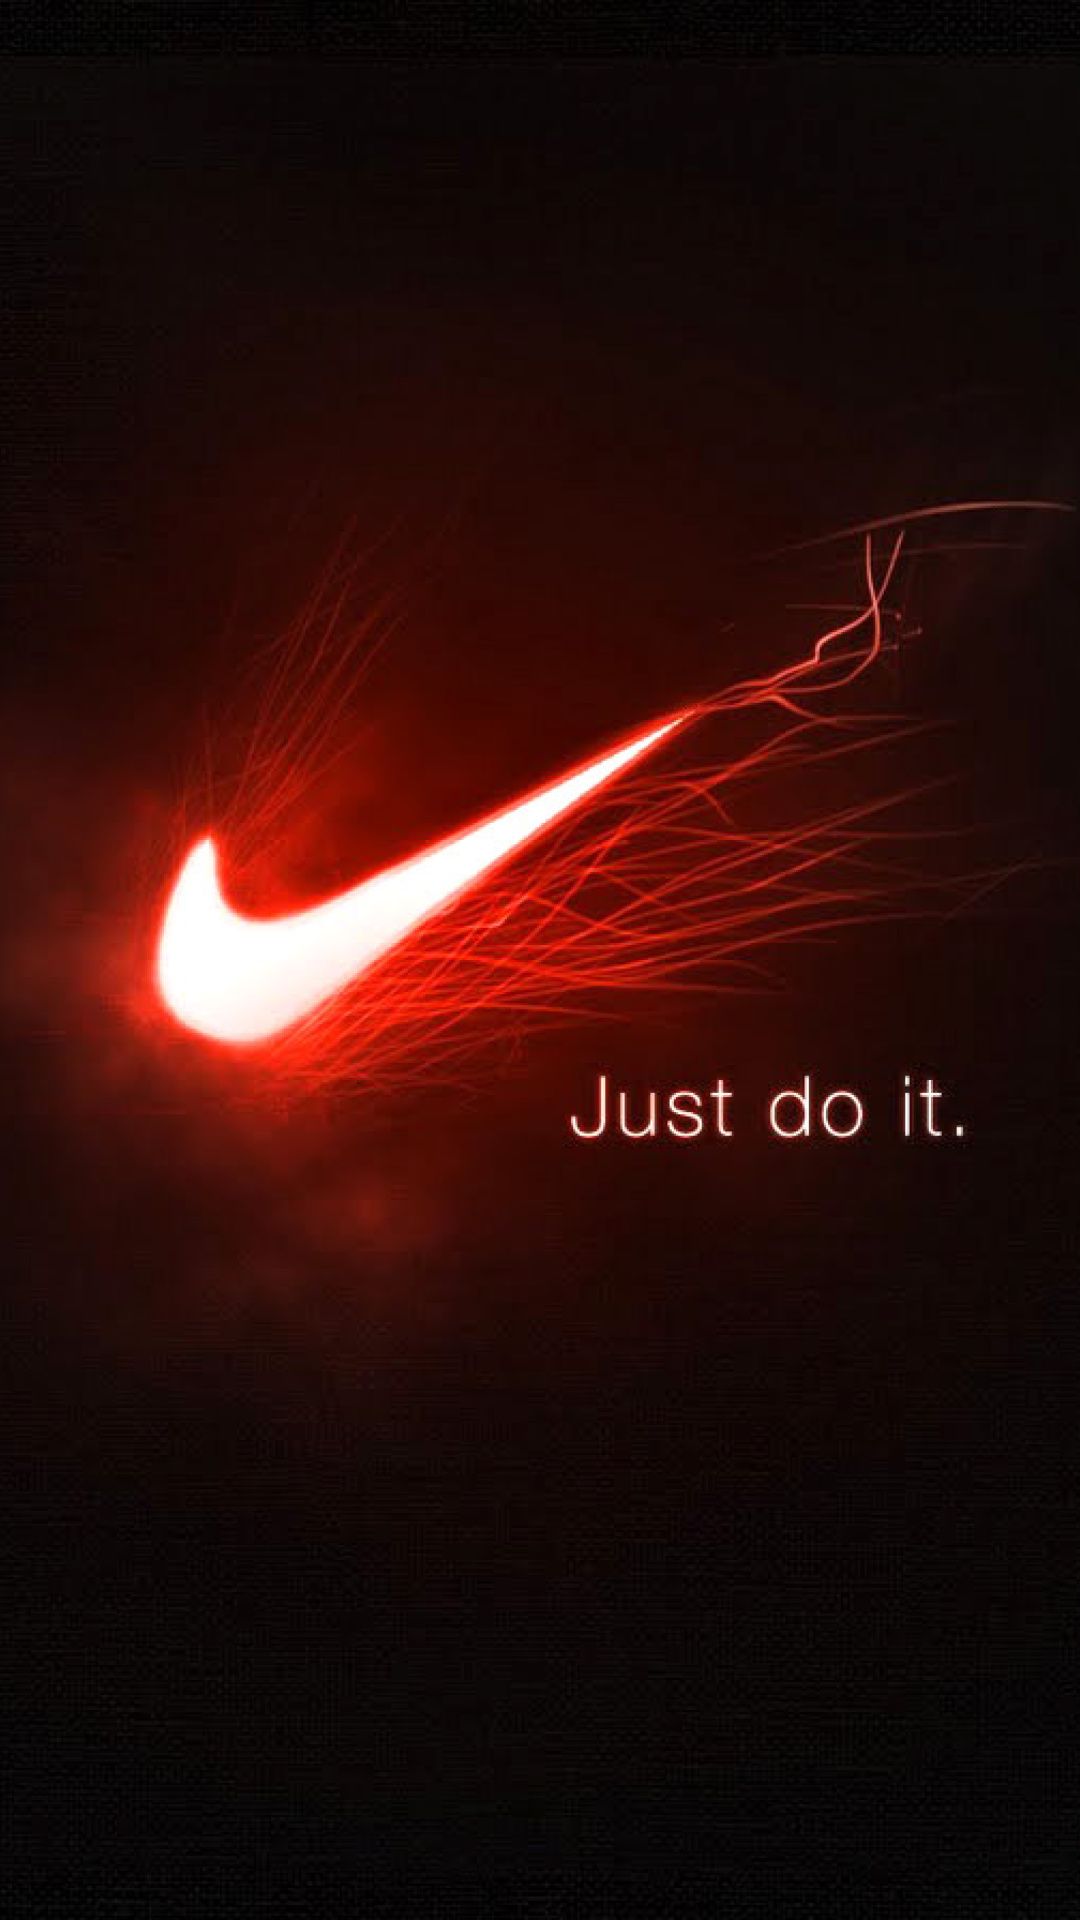 Just Do It Wallpaper  Just do it wallpapers Nike wallpaper backgrounds  Nike wallpaper